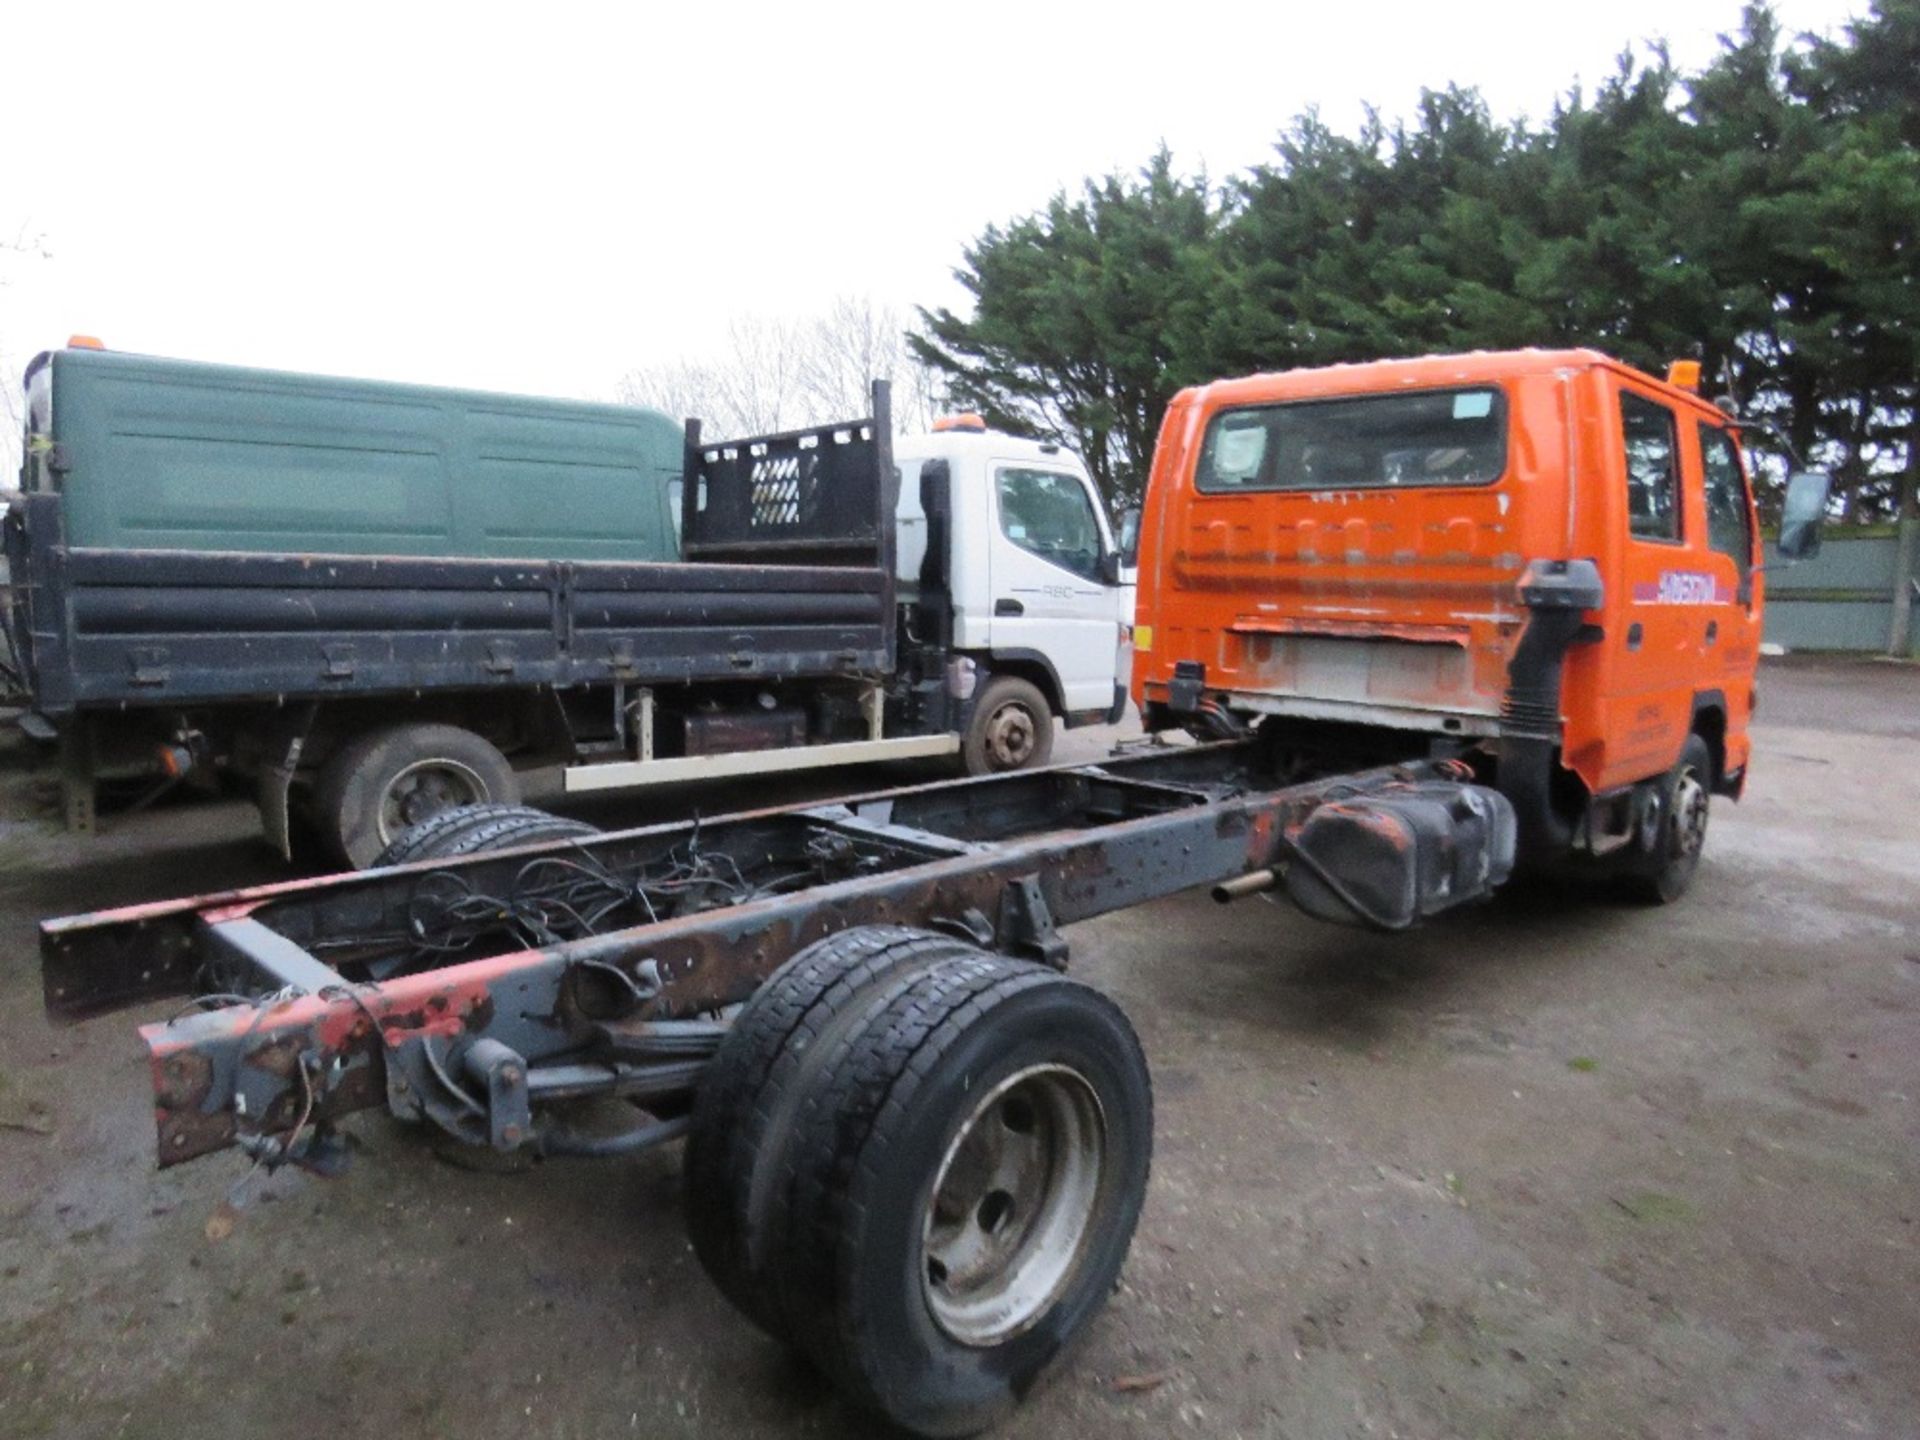 ISUZU DOUBLE CAB EASYSHIFT GEARBOX 7500KG RATED CHASSIS CAB LORRY. REG KE57 CZH. 12FT LENGTH OF CHAS - Image 7 of 9